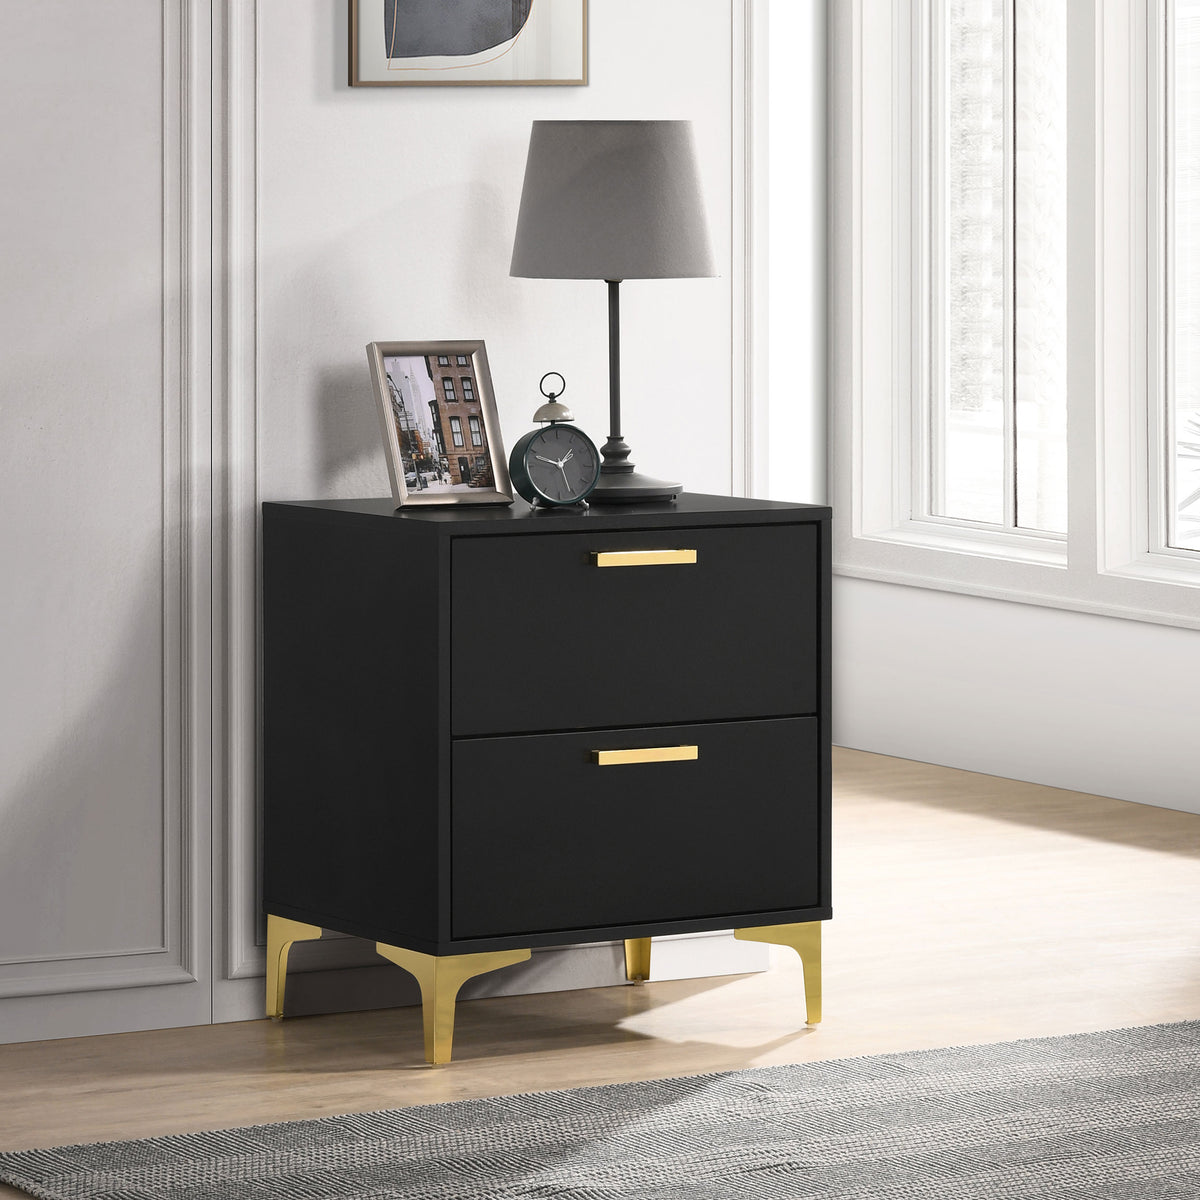 Kendall 2-drawer Nightstand Black and Gold Kendall 2-drawer Nightstand Black and Gold Half Price Furniture